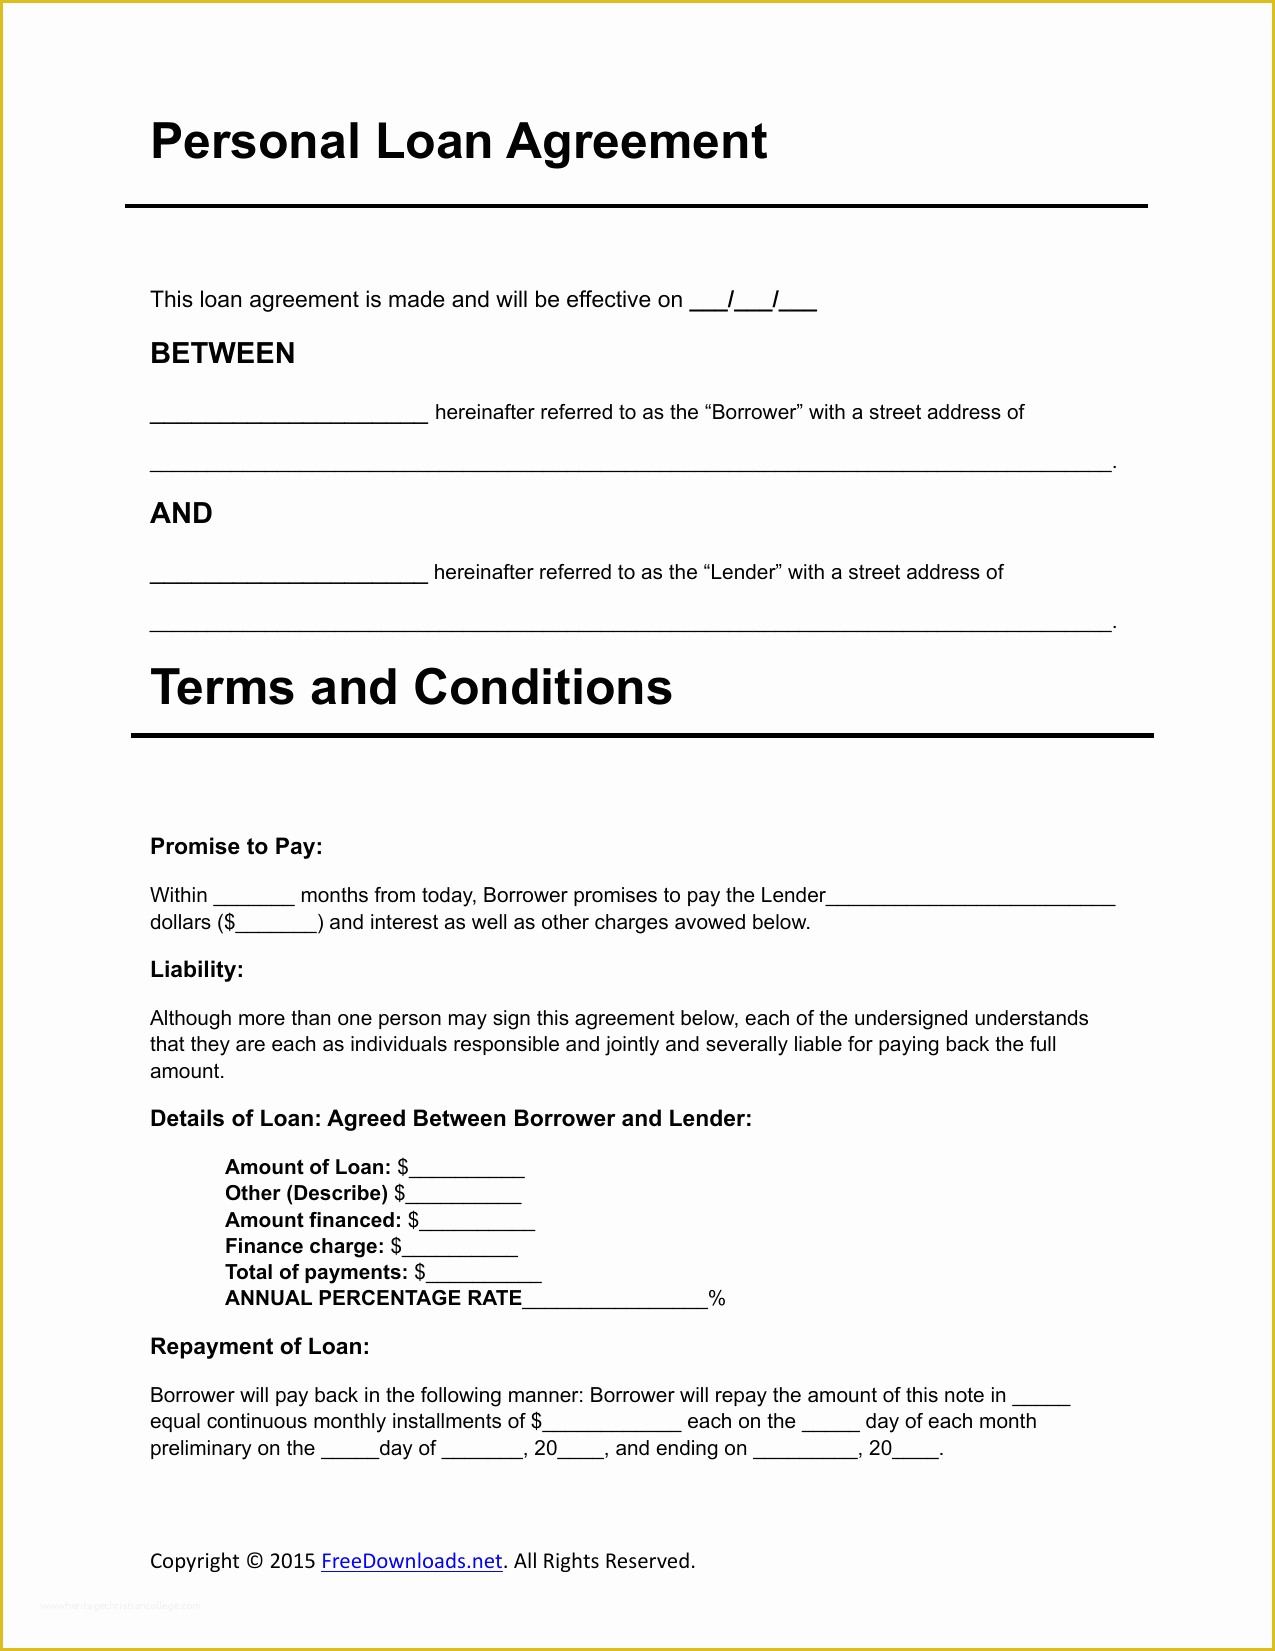 Free Financial Loan Agreement Template Of Download Personal Loan Agreement Template Pdf